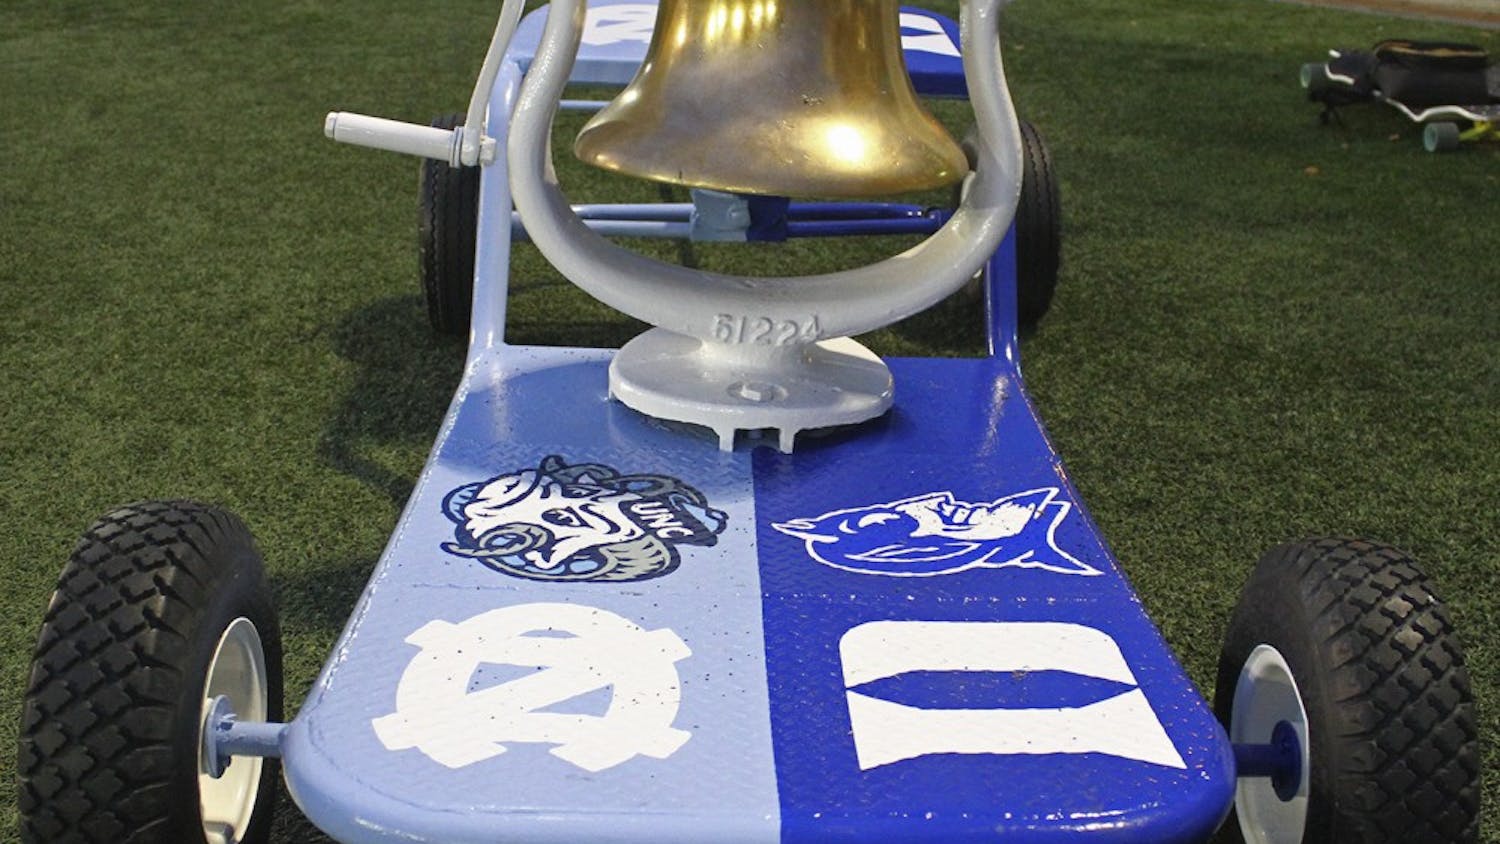 UNC and Duke decided to change the color scheme of the victory bell platform, and say no to post game spray-painting.